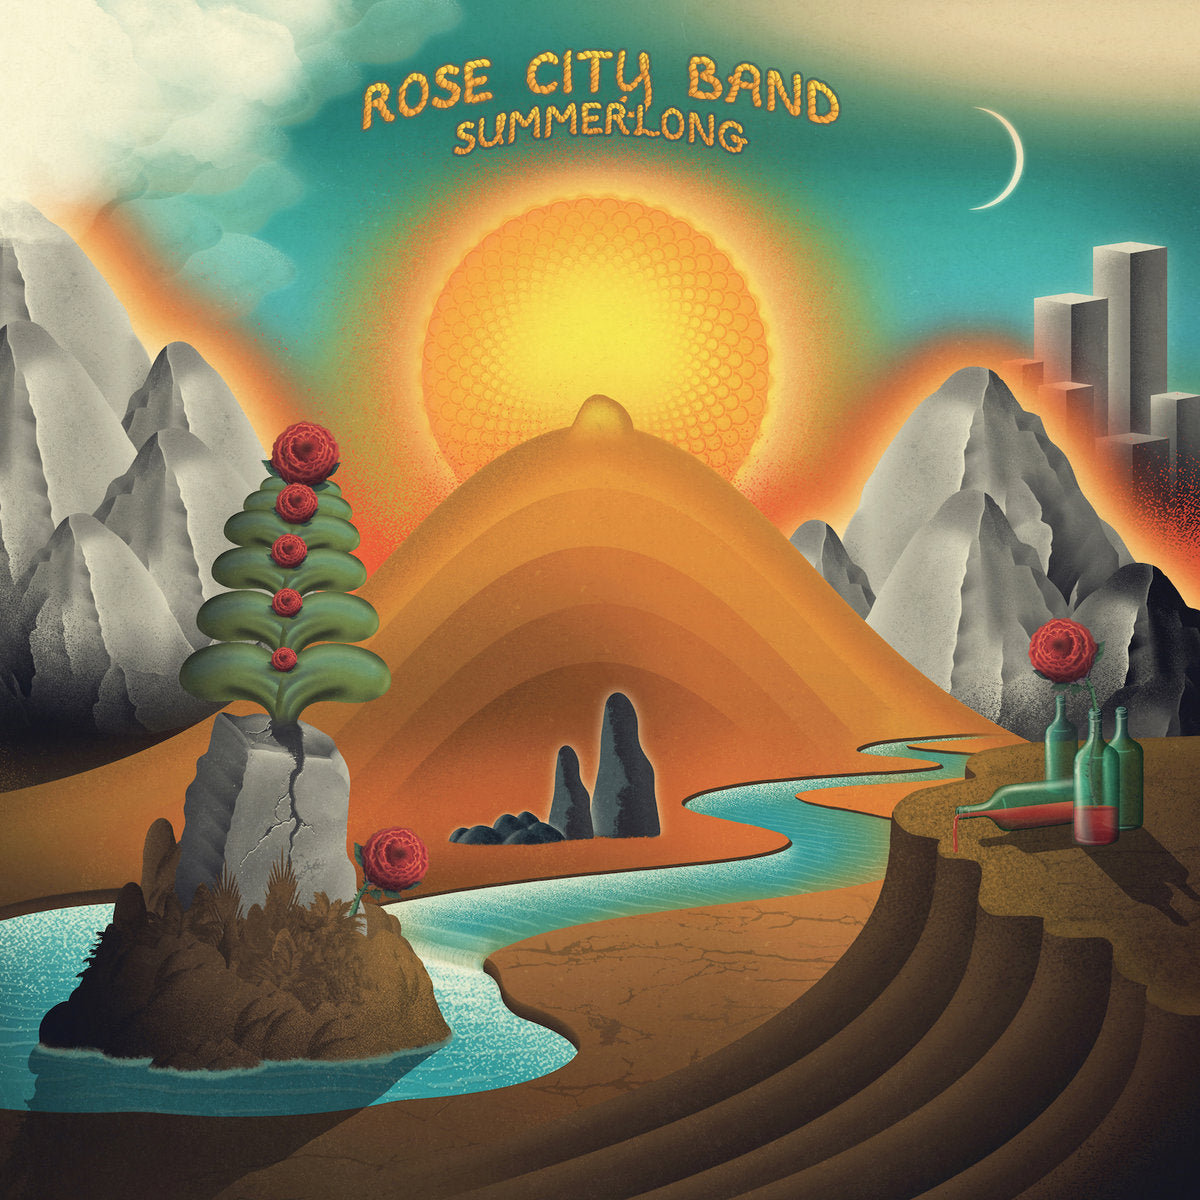 ROSE CITY BAND - Summerlong (Love Record Stores Variant) - LP - Limited Buttercup Coloured Vinyl